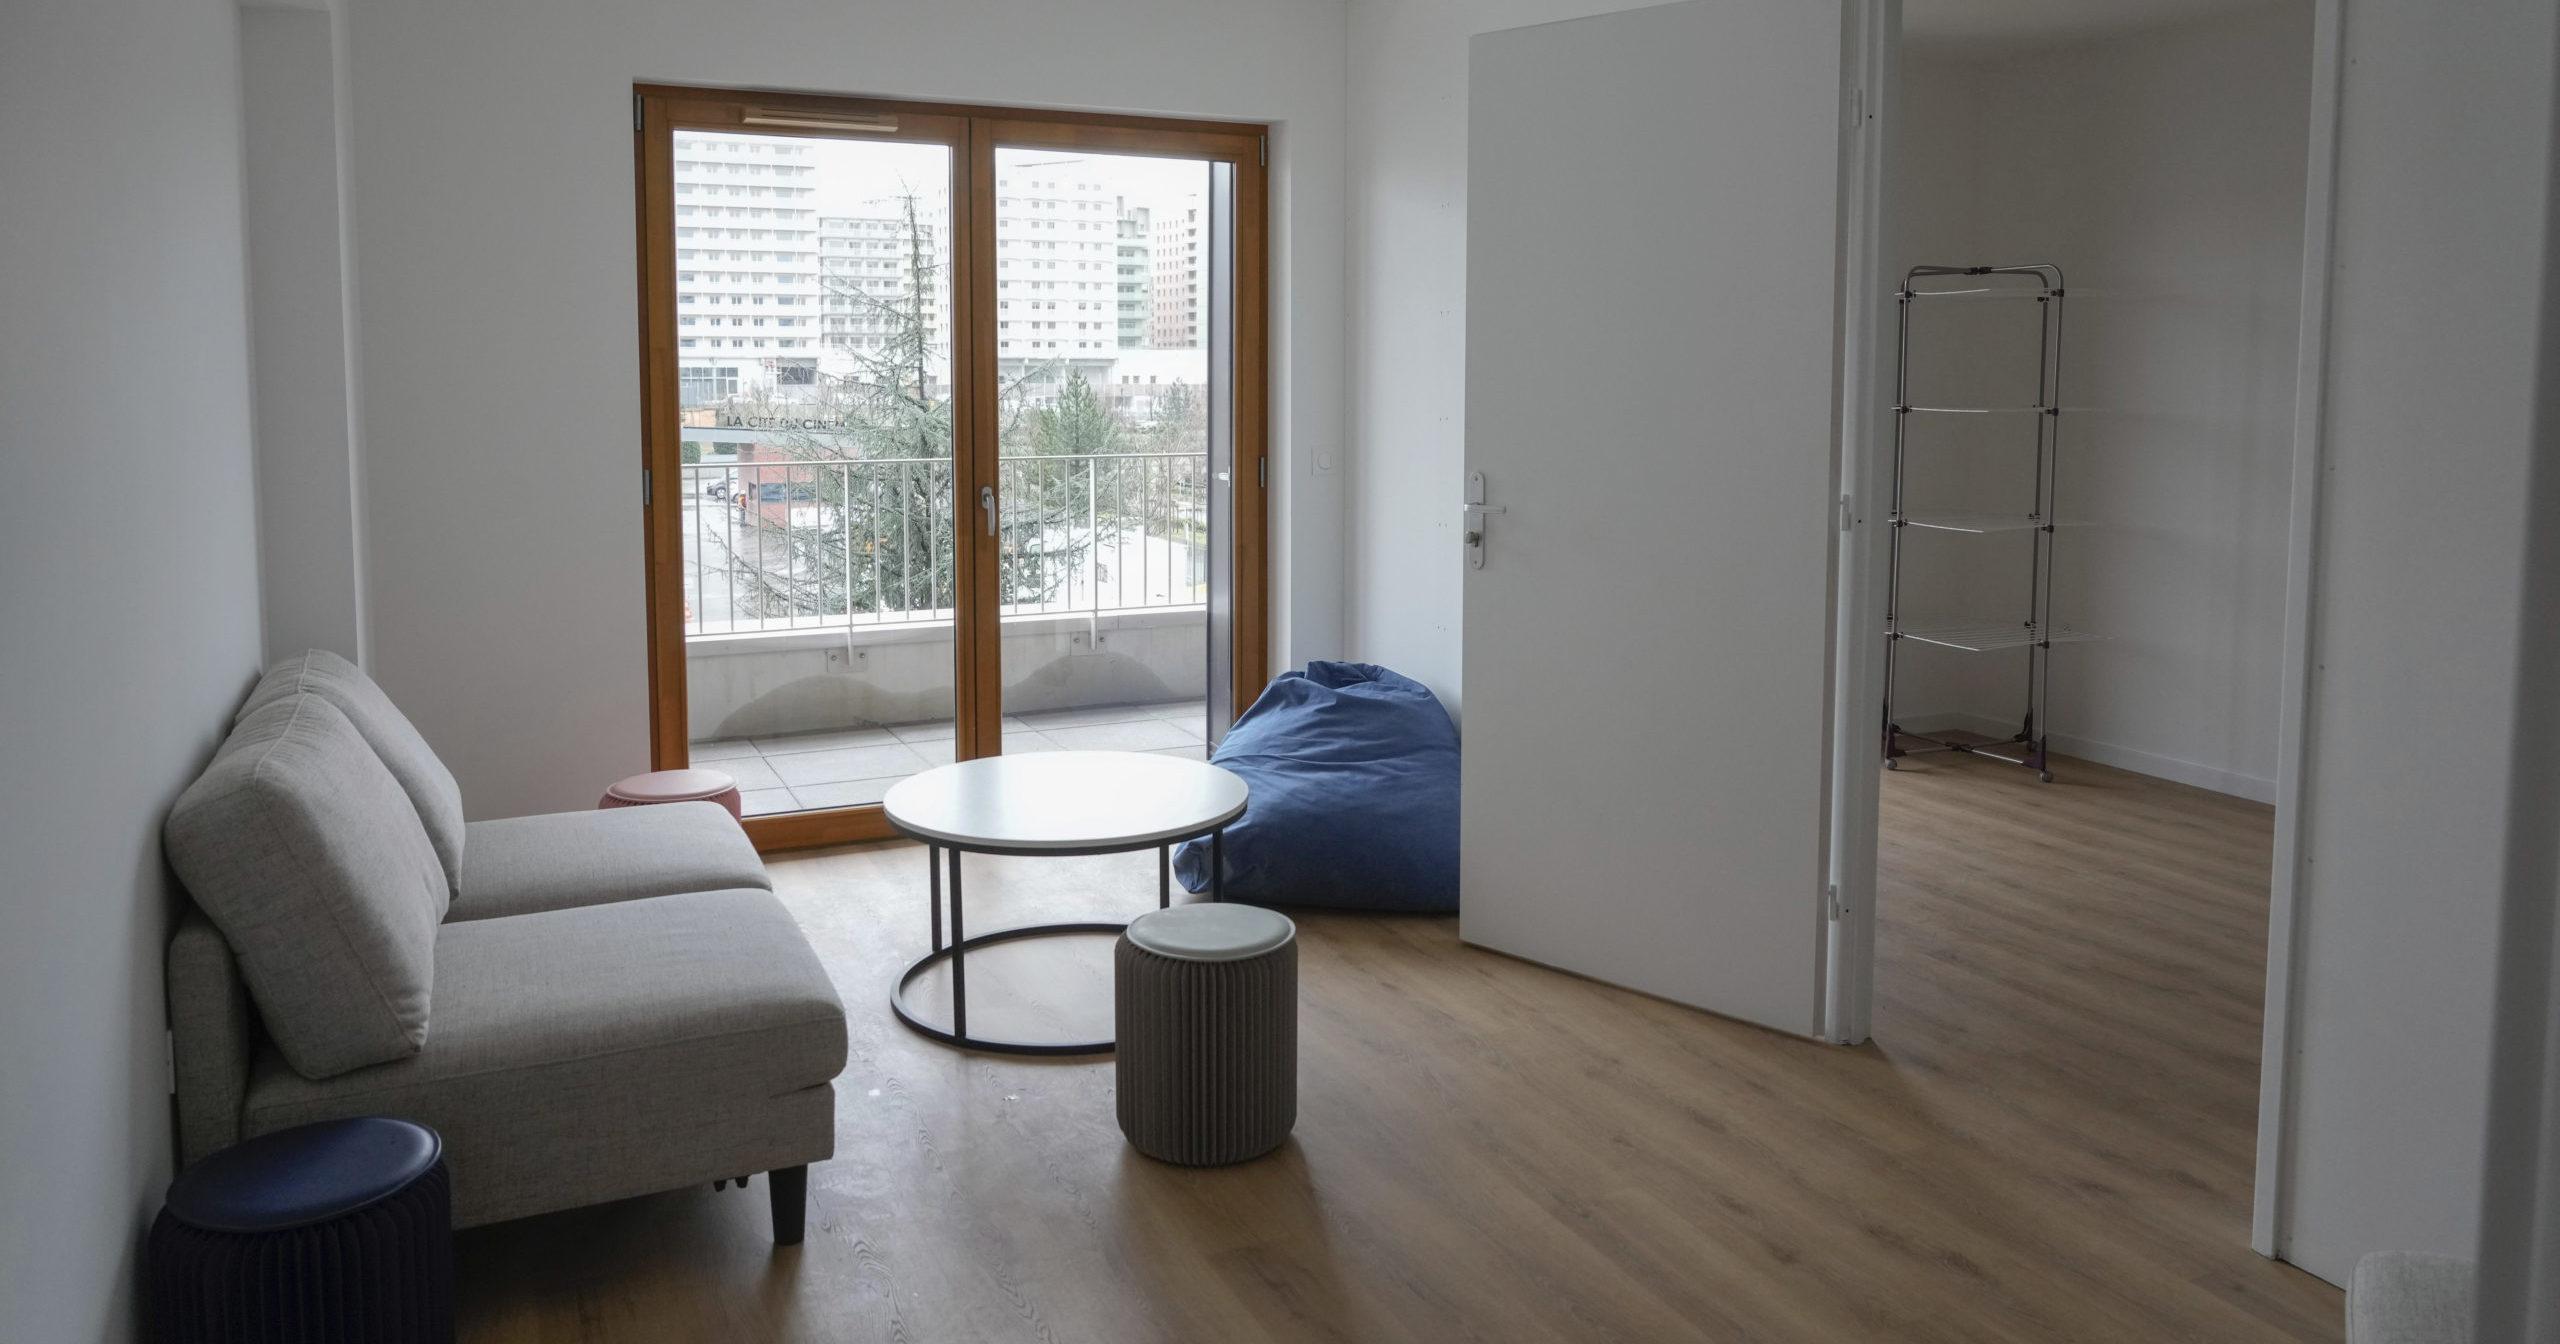 A living room of the Olympic village is pictured, in Saint-Denis, north of Paris, Wednesday, Feb. 28, 2024.